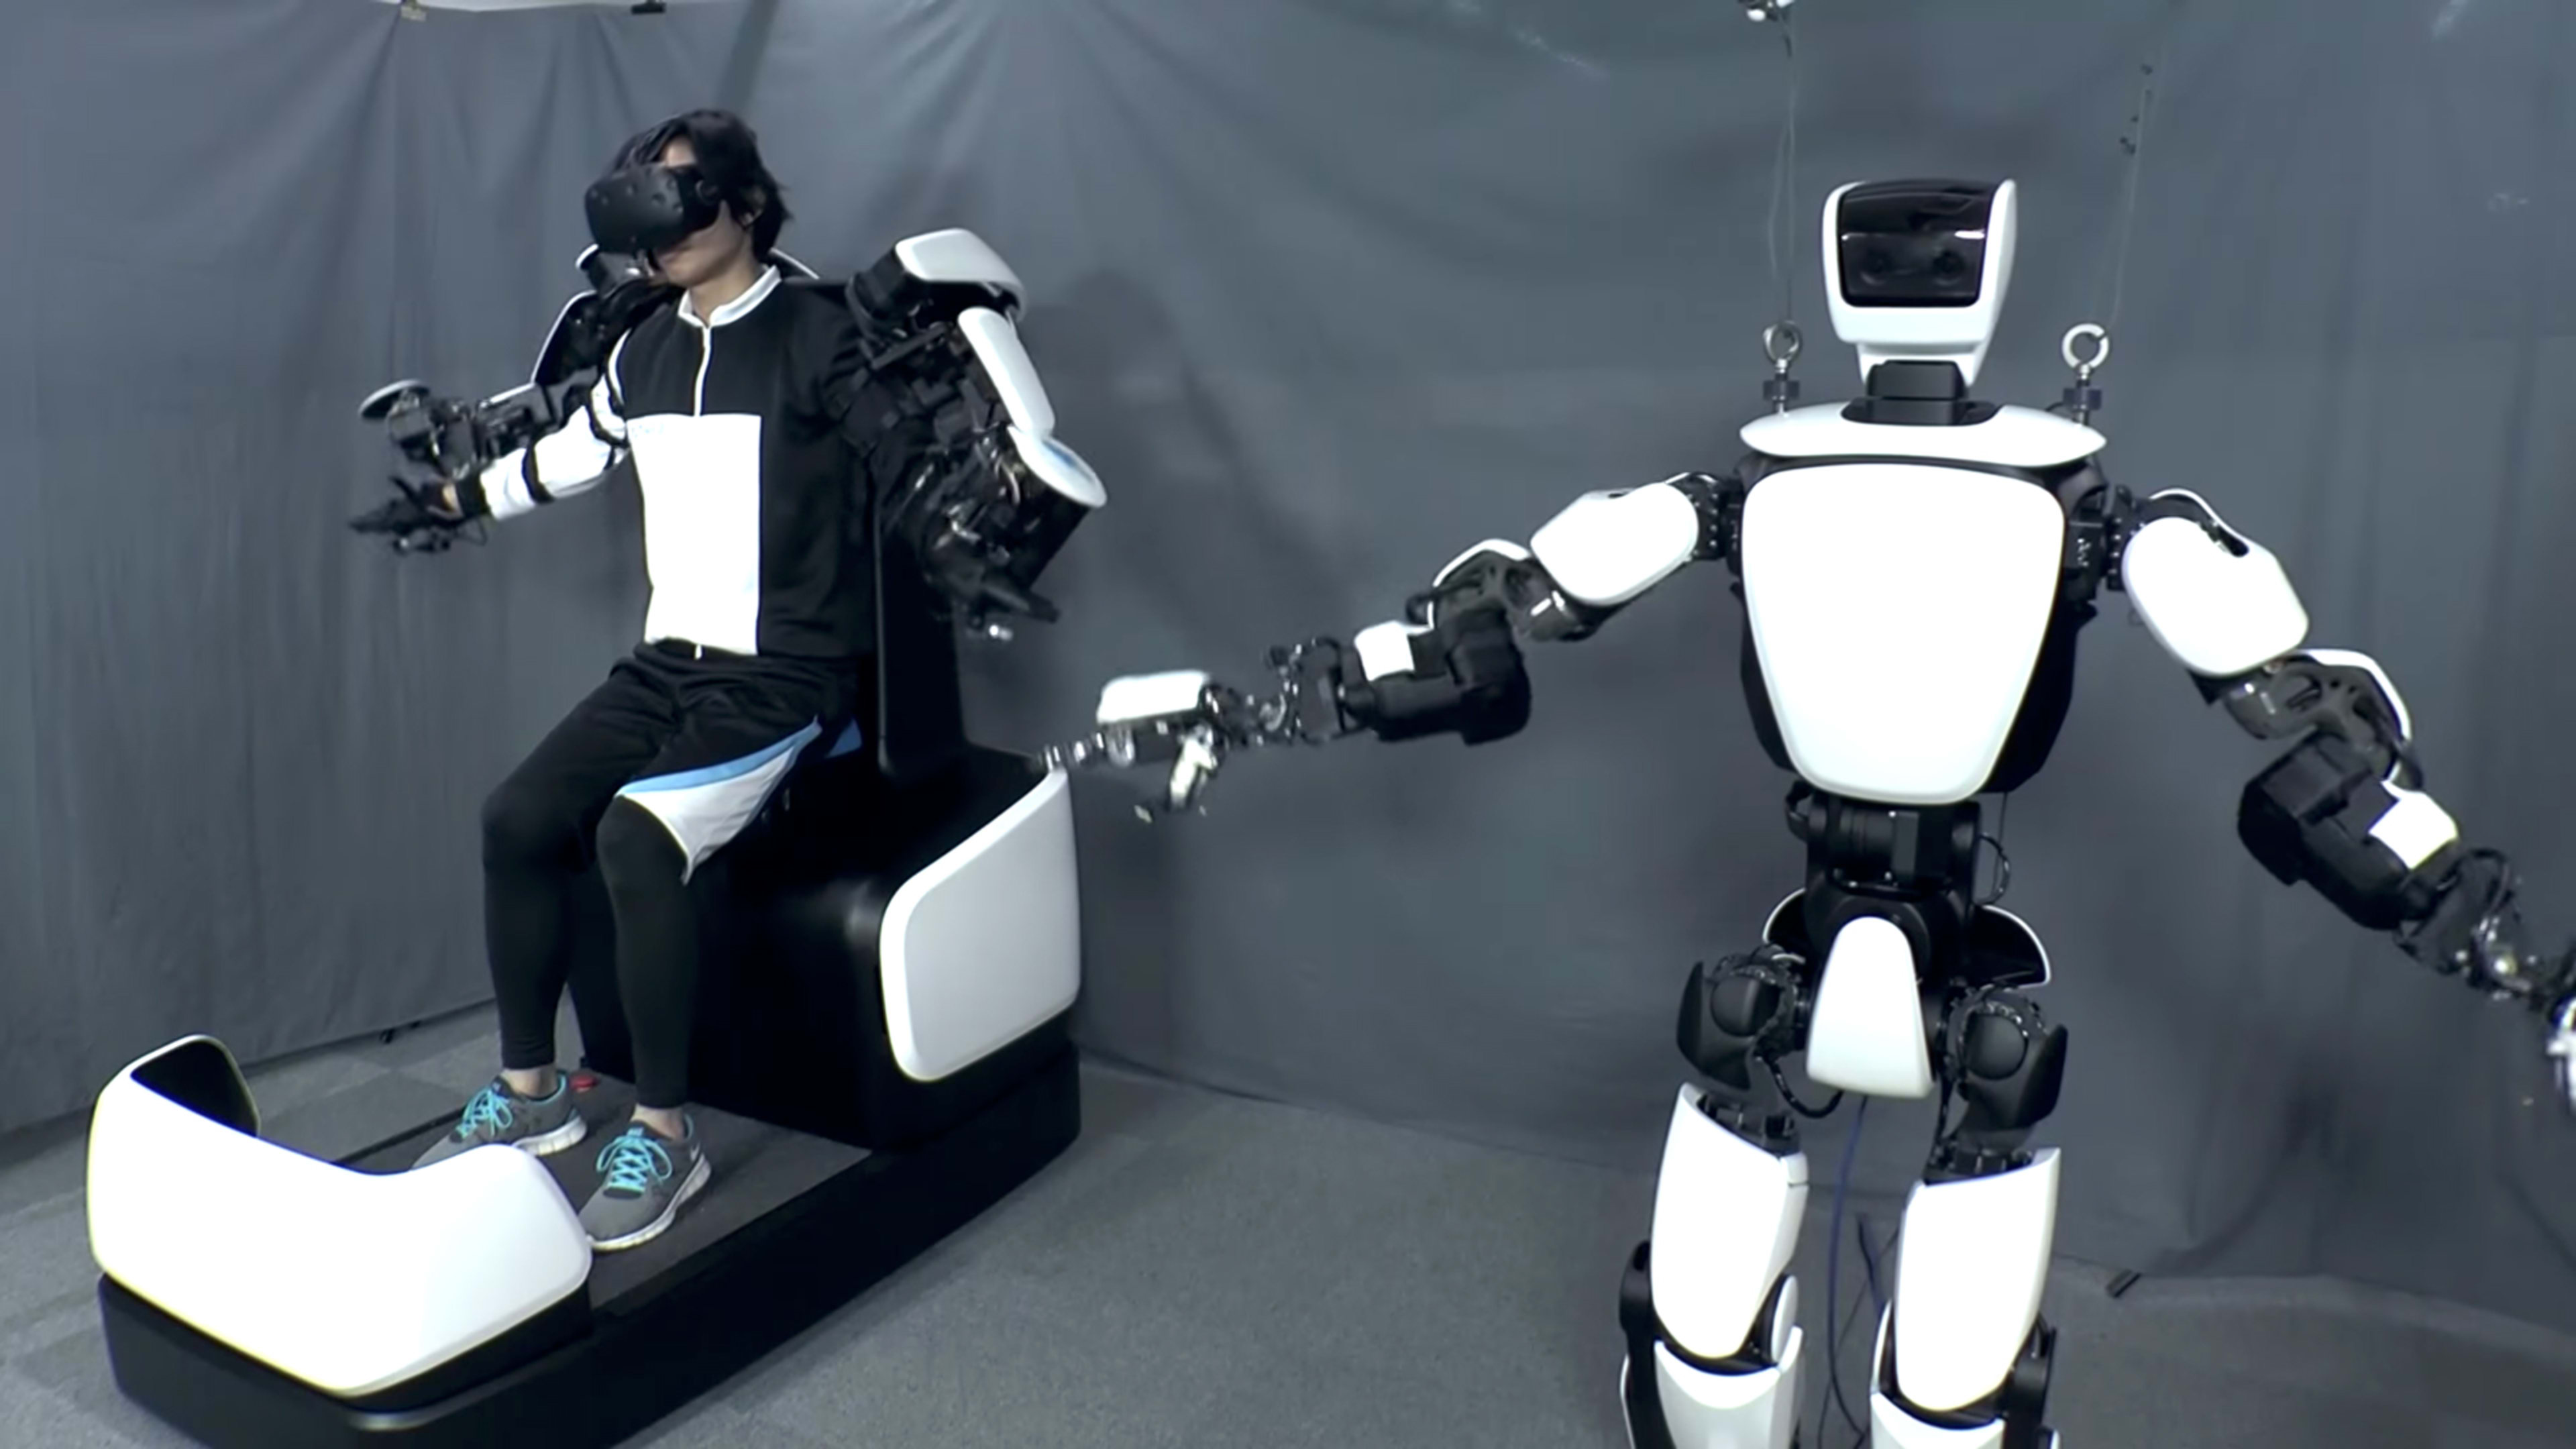 Watch man and robot merge Avatar-style thanks to 5G